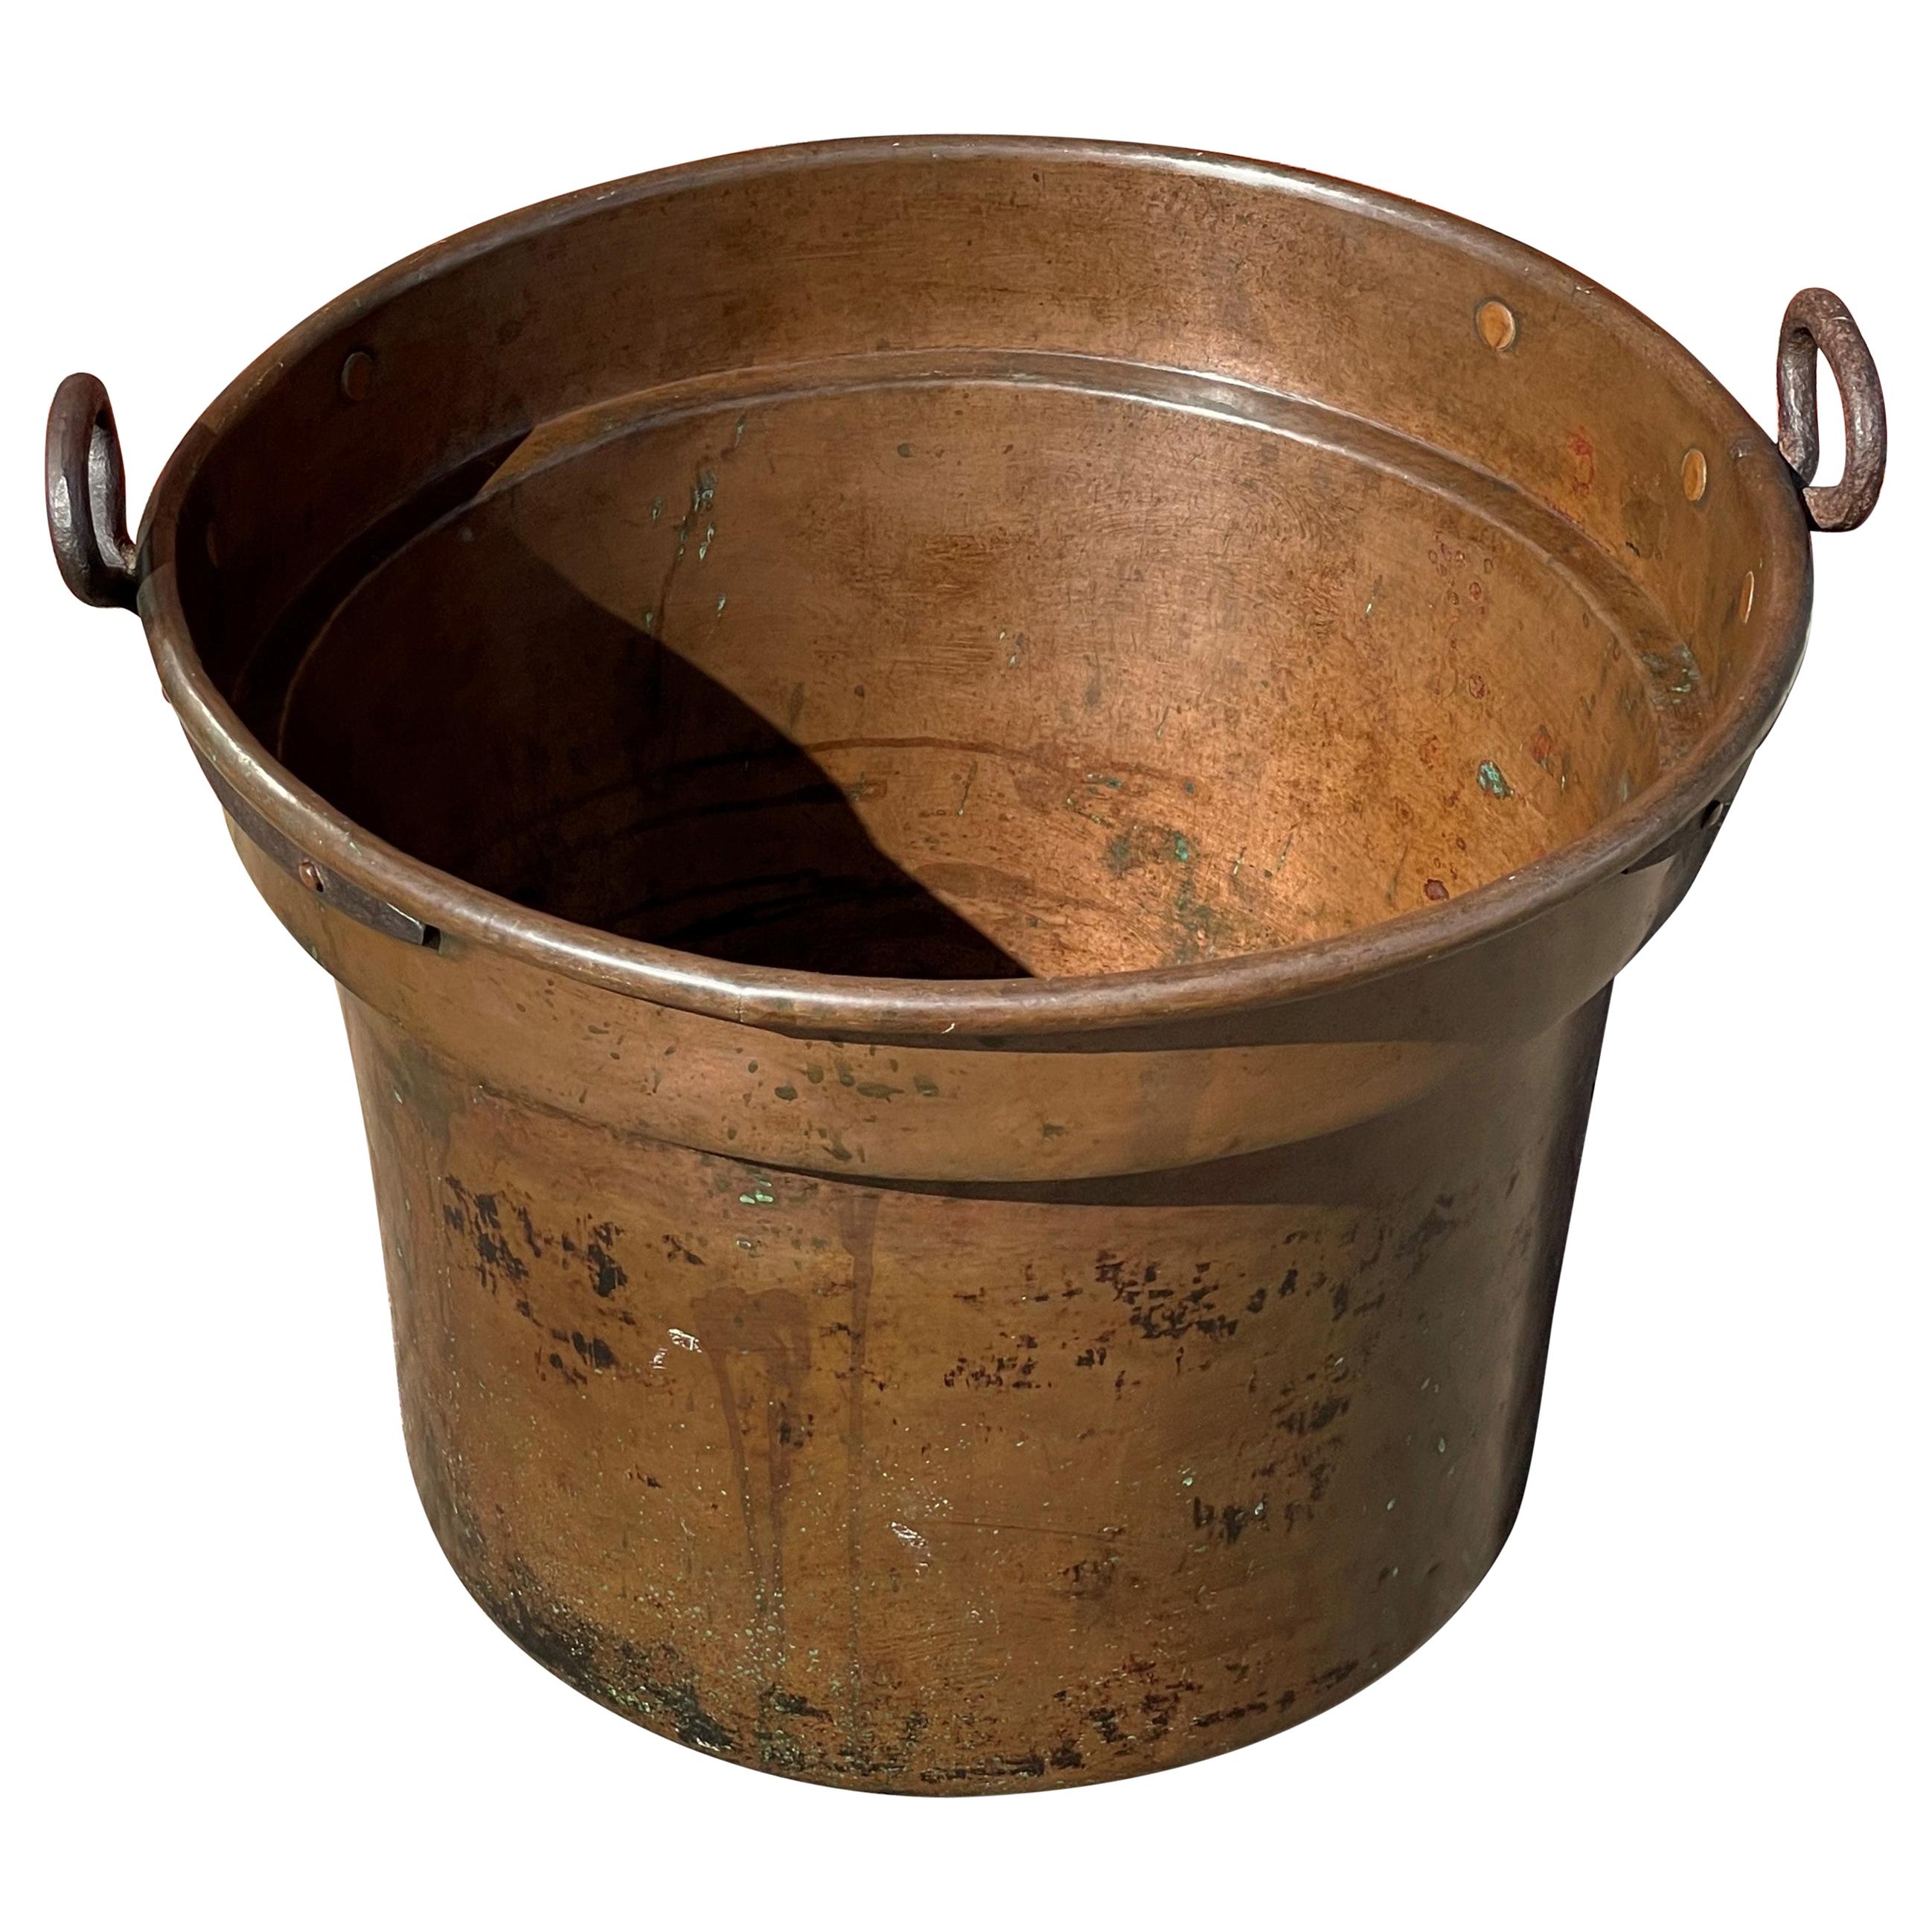 Largest Antique & Handcrafted Copper and Forged Iron Firewood Bucket or Planter